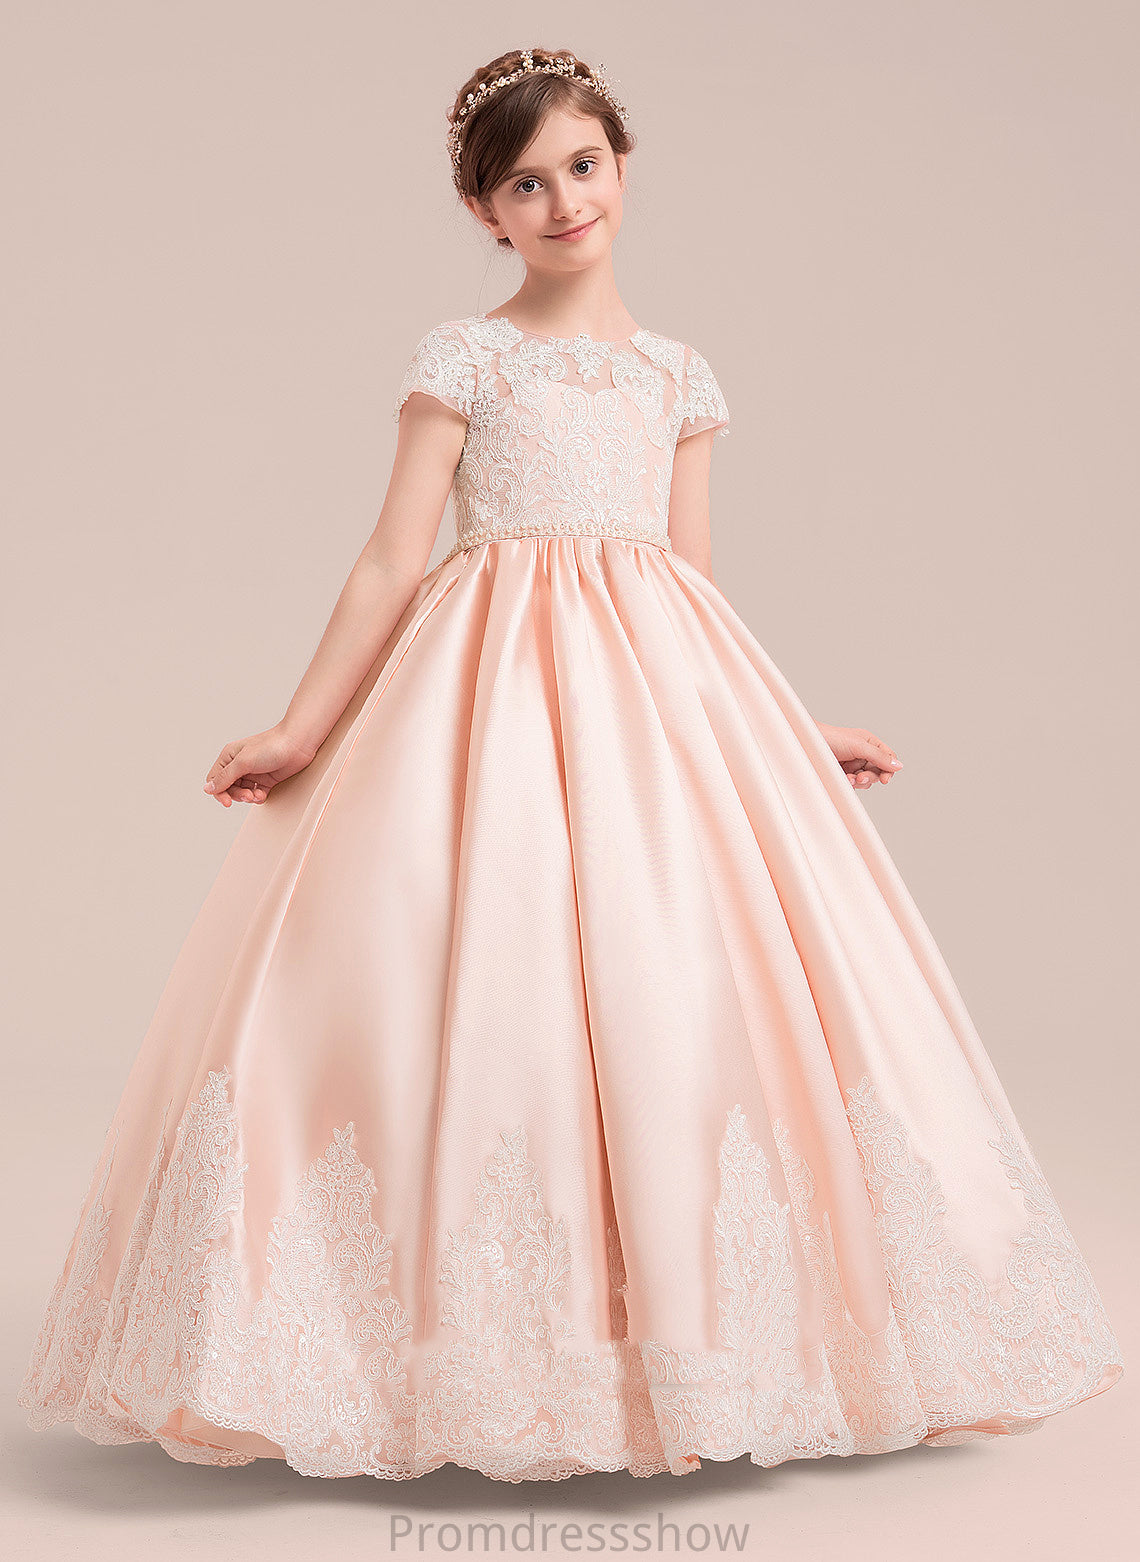 NOT Neck Ball included) Flower Flower Girl Dresses - Satin/Tulle/Lace Sleeves Girl Scoop Short Floor-length (Petticoat Gown Beading Viola Dress With